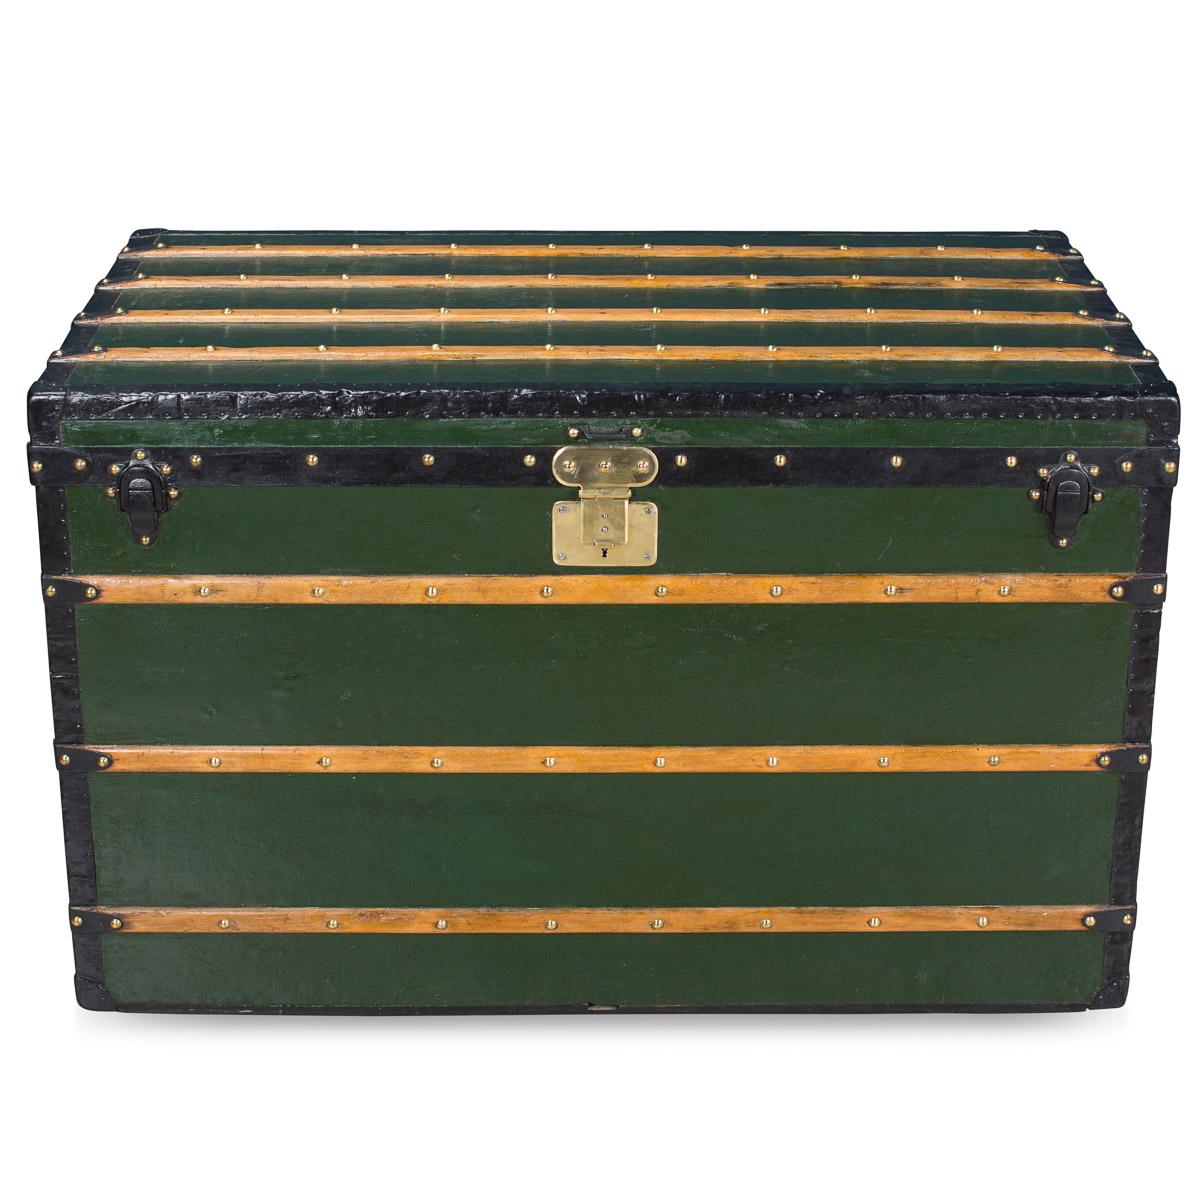 Antique 19th century rare and early Louis Vuitton of grand proportions. This trunk pre-dates the famous monogram or damier canvas covered trunks and would make a great addition to any collection.
Condition:

Some wear. Structurally